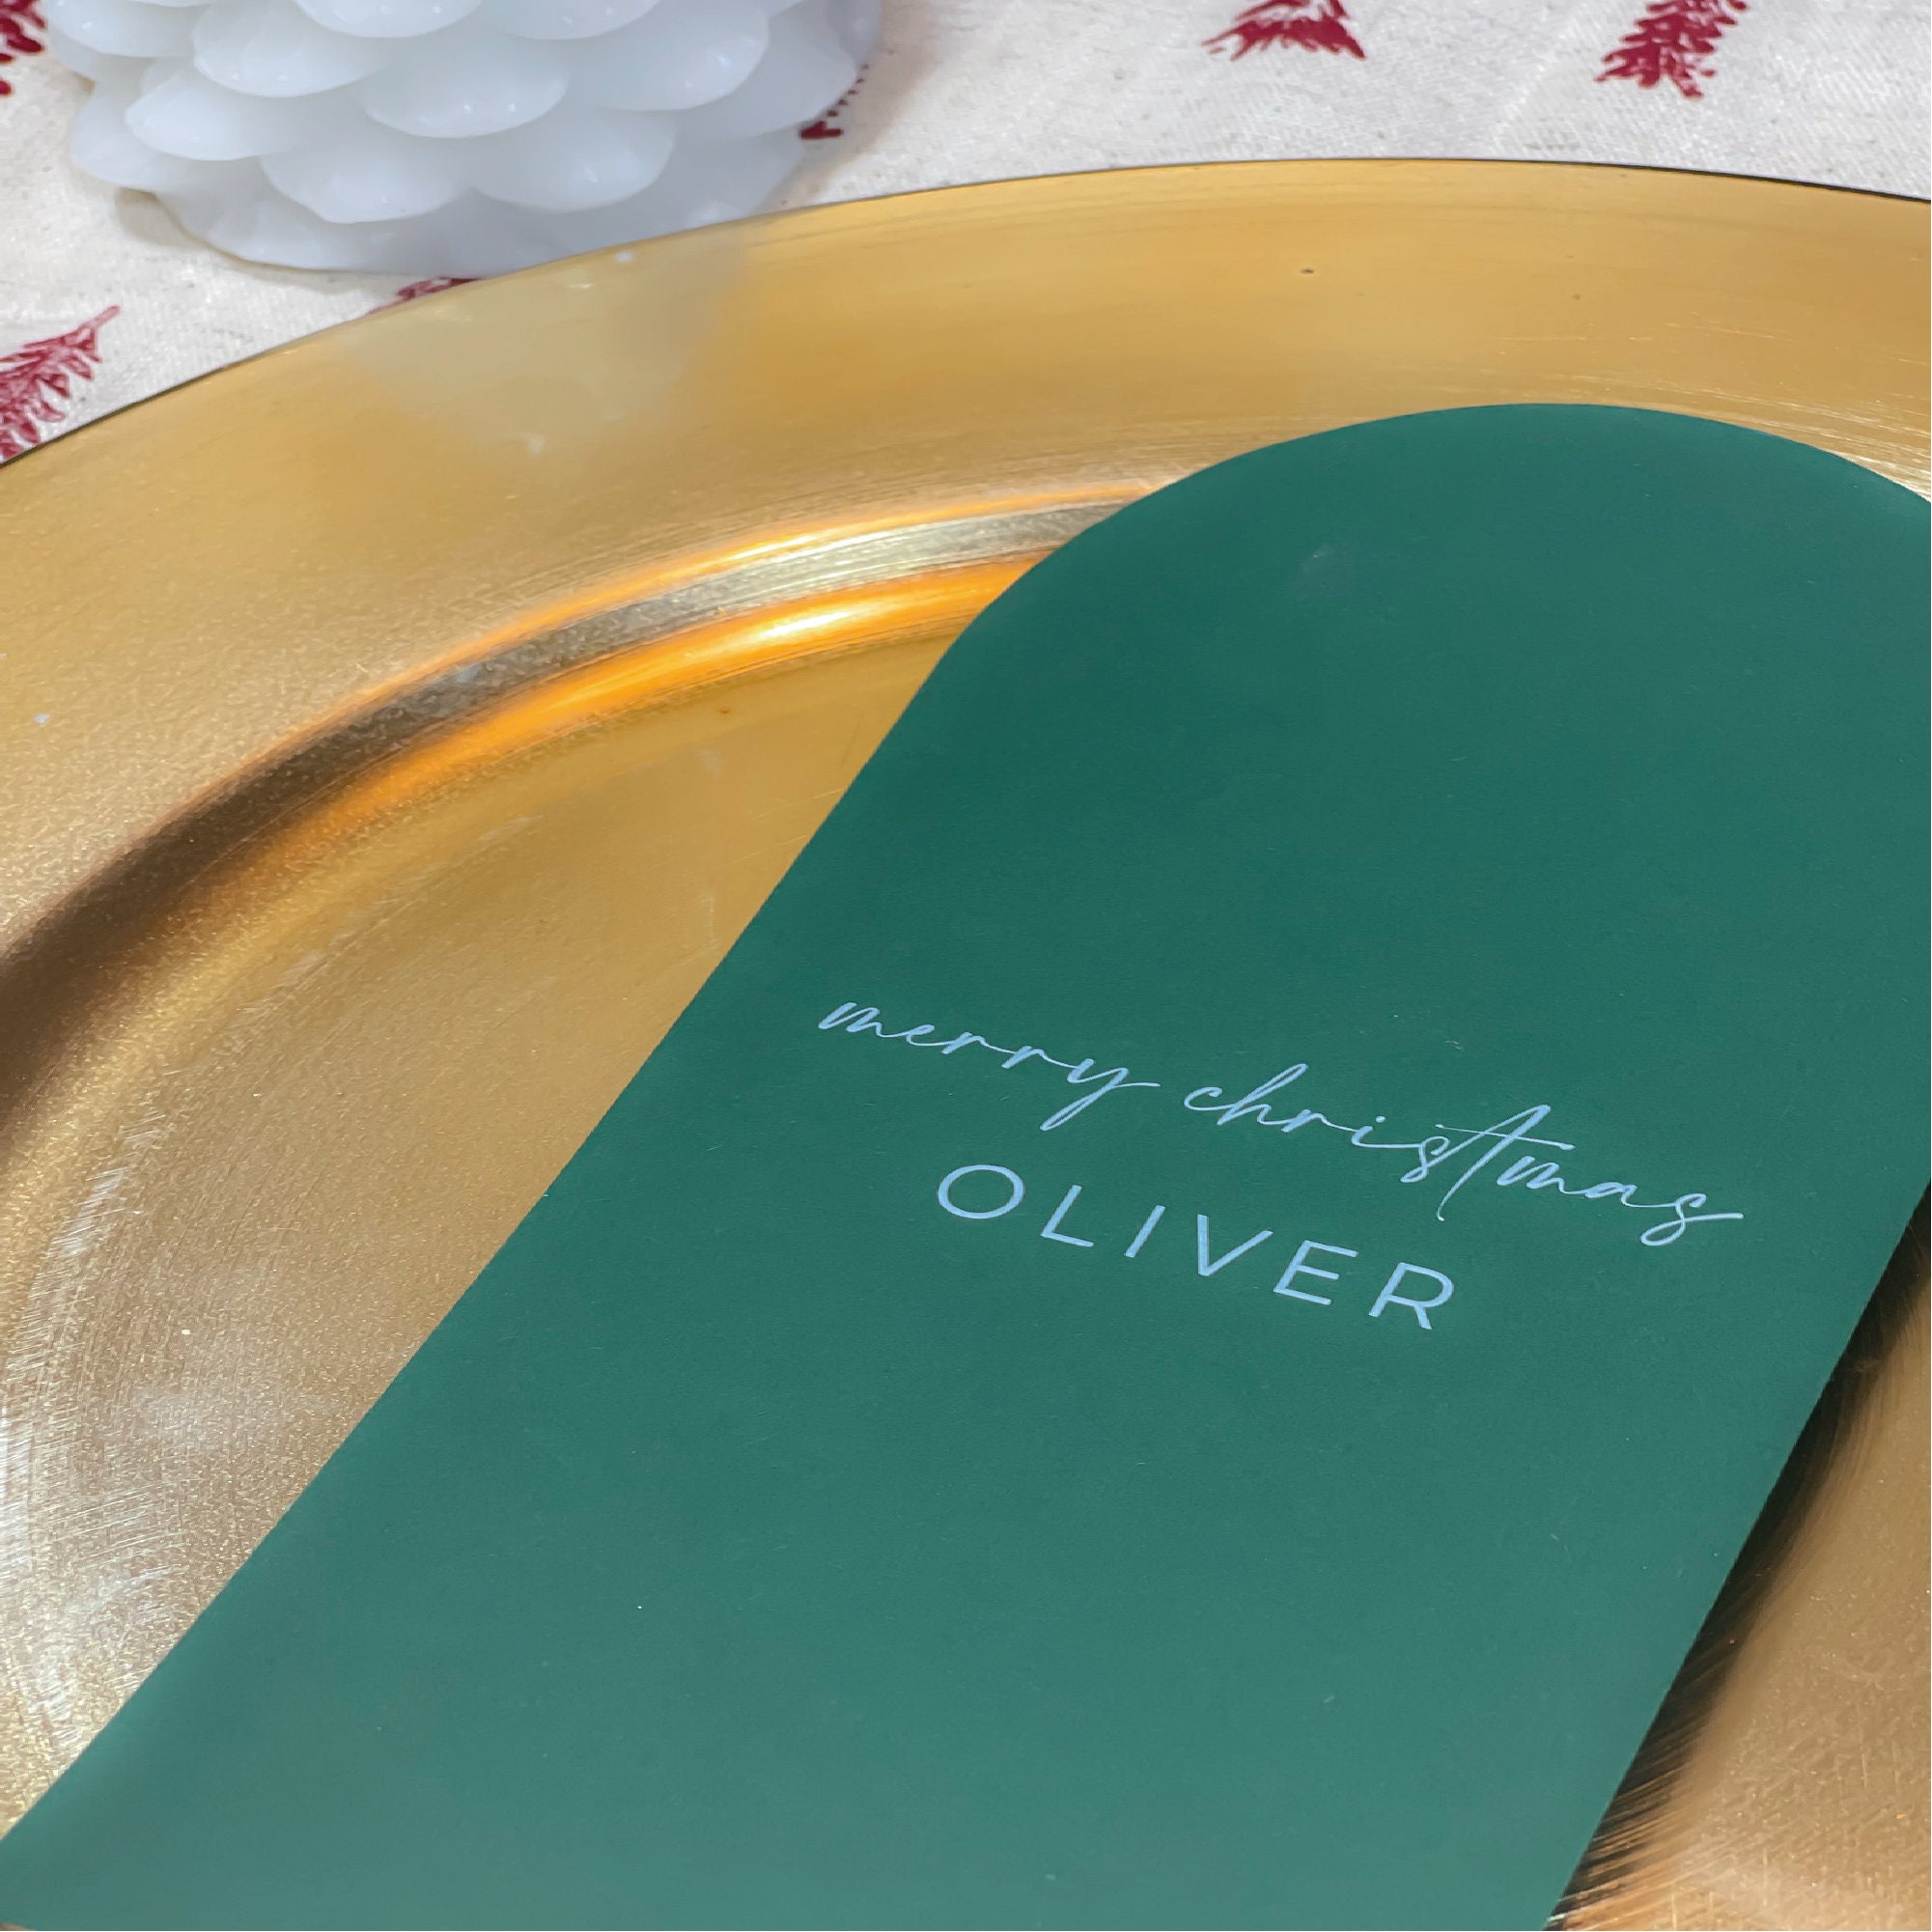 Christmas, Menu, Placecards, Arch, Place Names, Christmas Dinner, Family